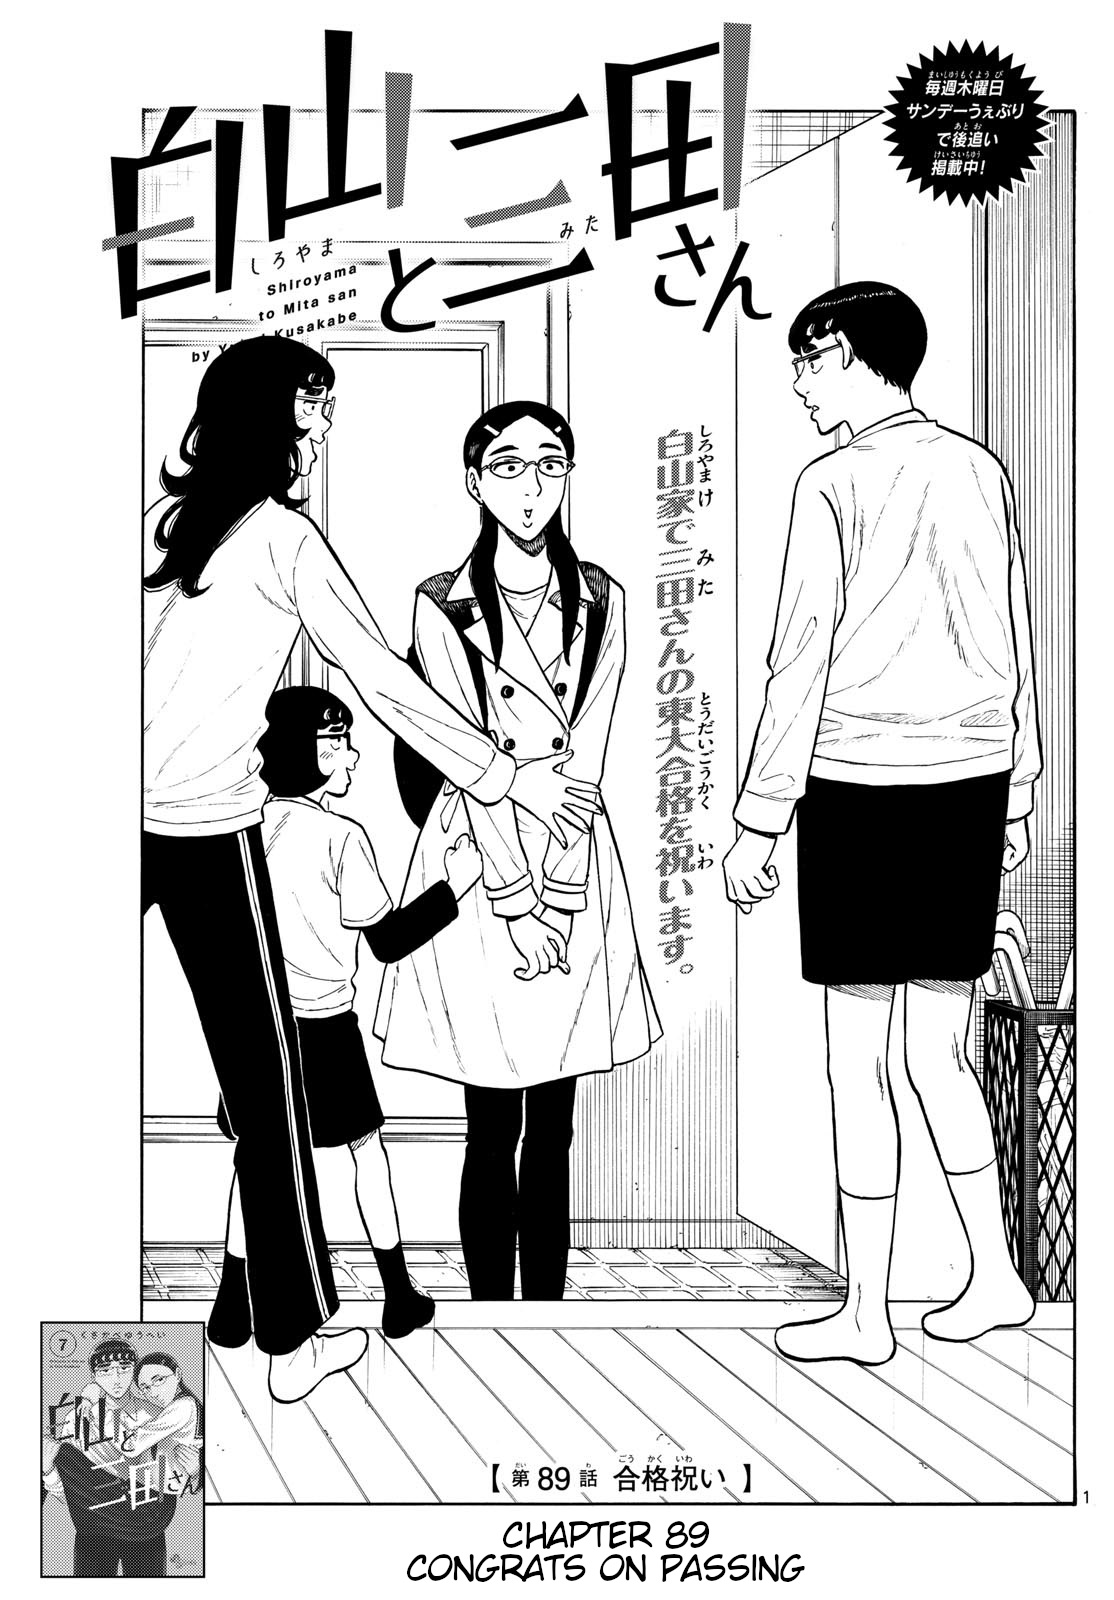 Shiroyama To Mita-San Chapter 89: Congrats On Passing - Picture 1